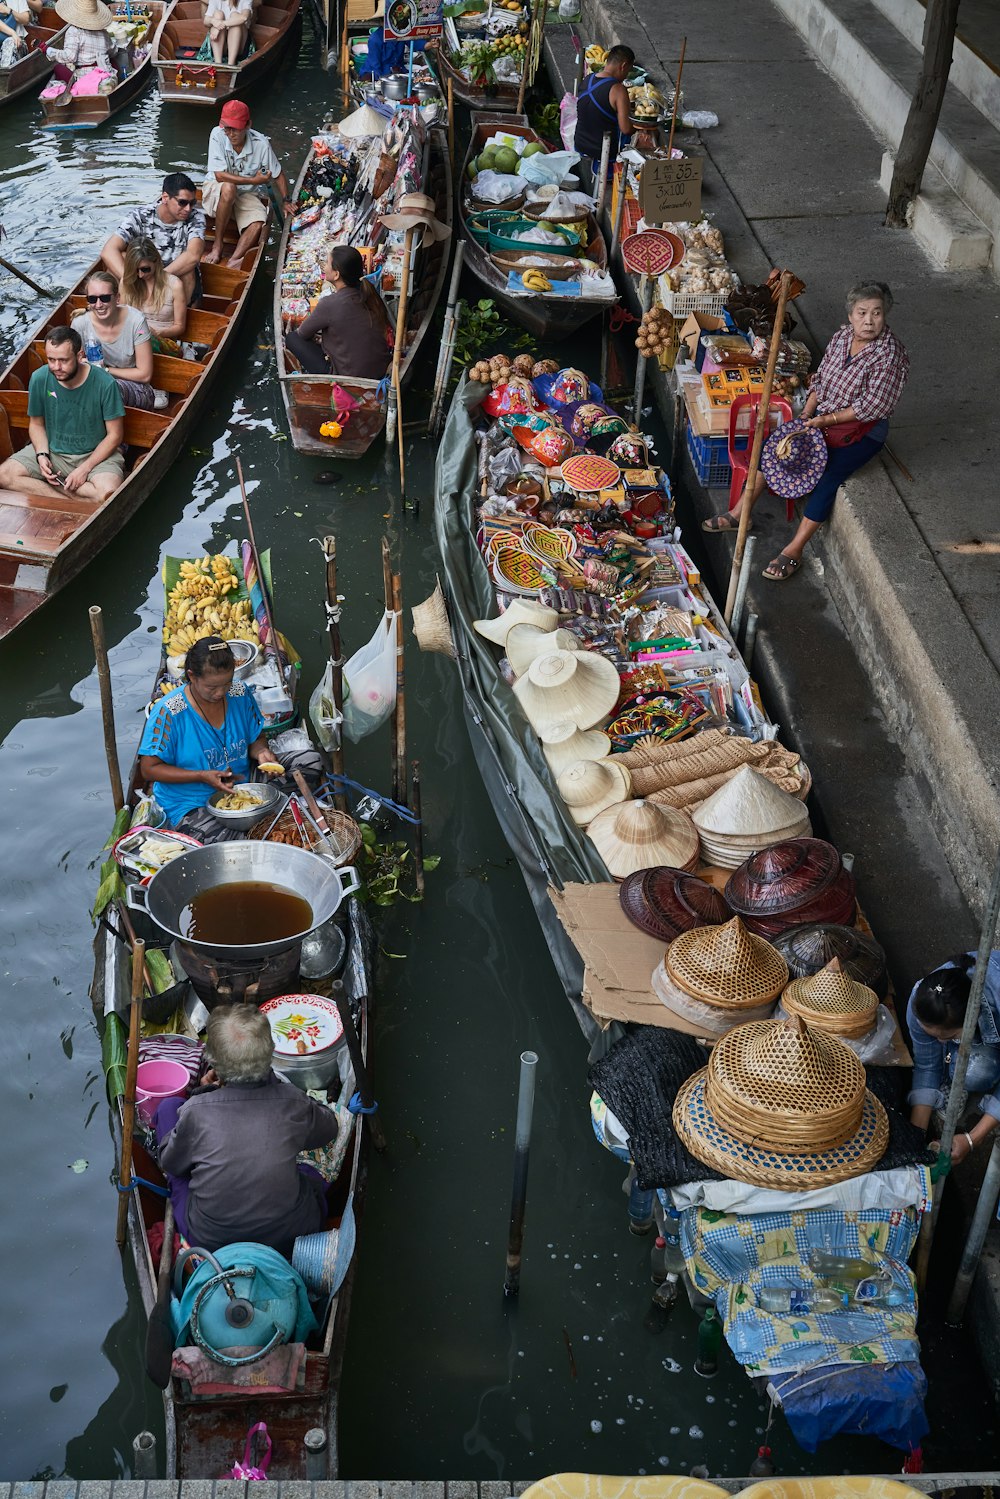 a group of people sitting on boats in a body of water